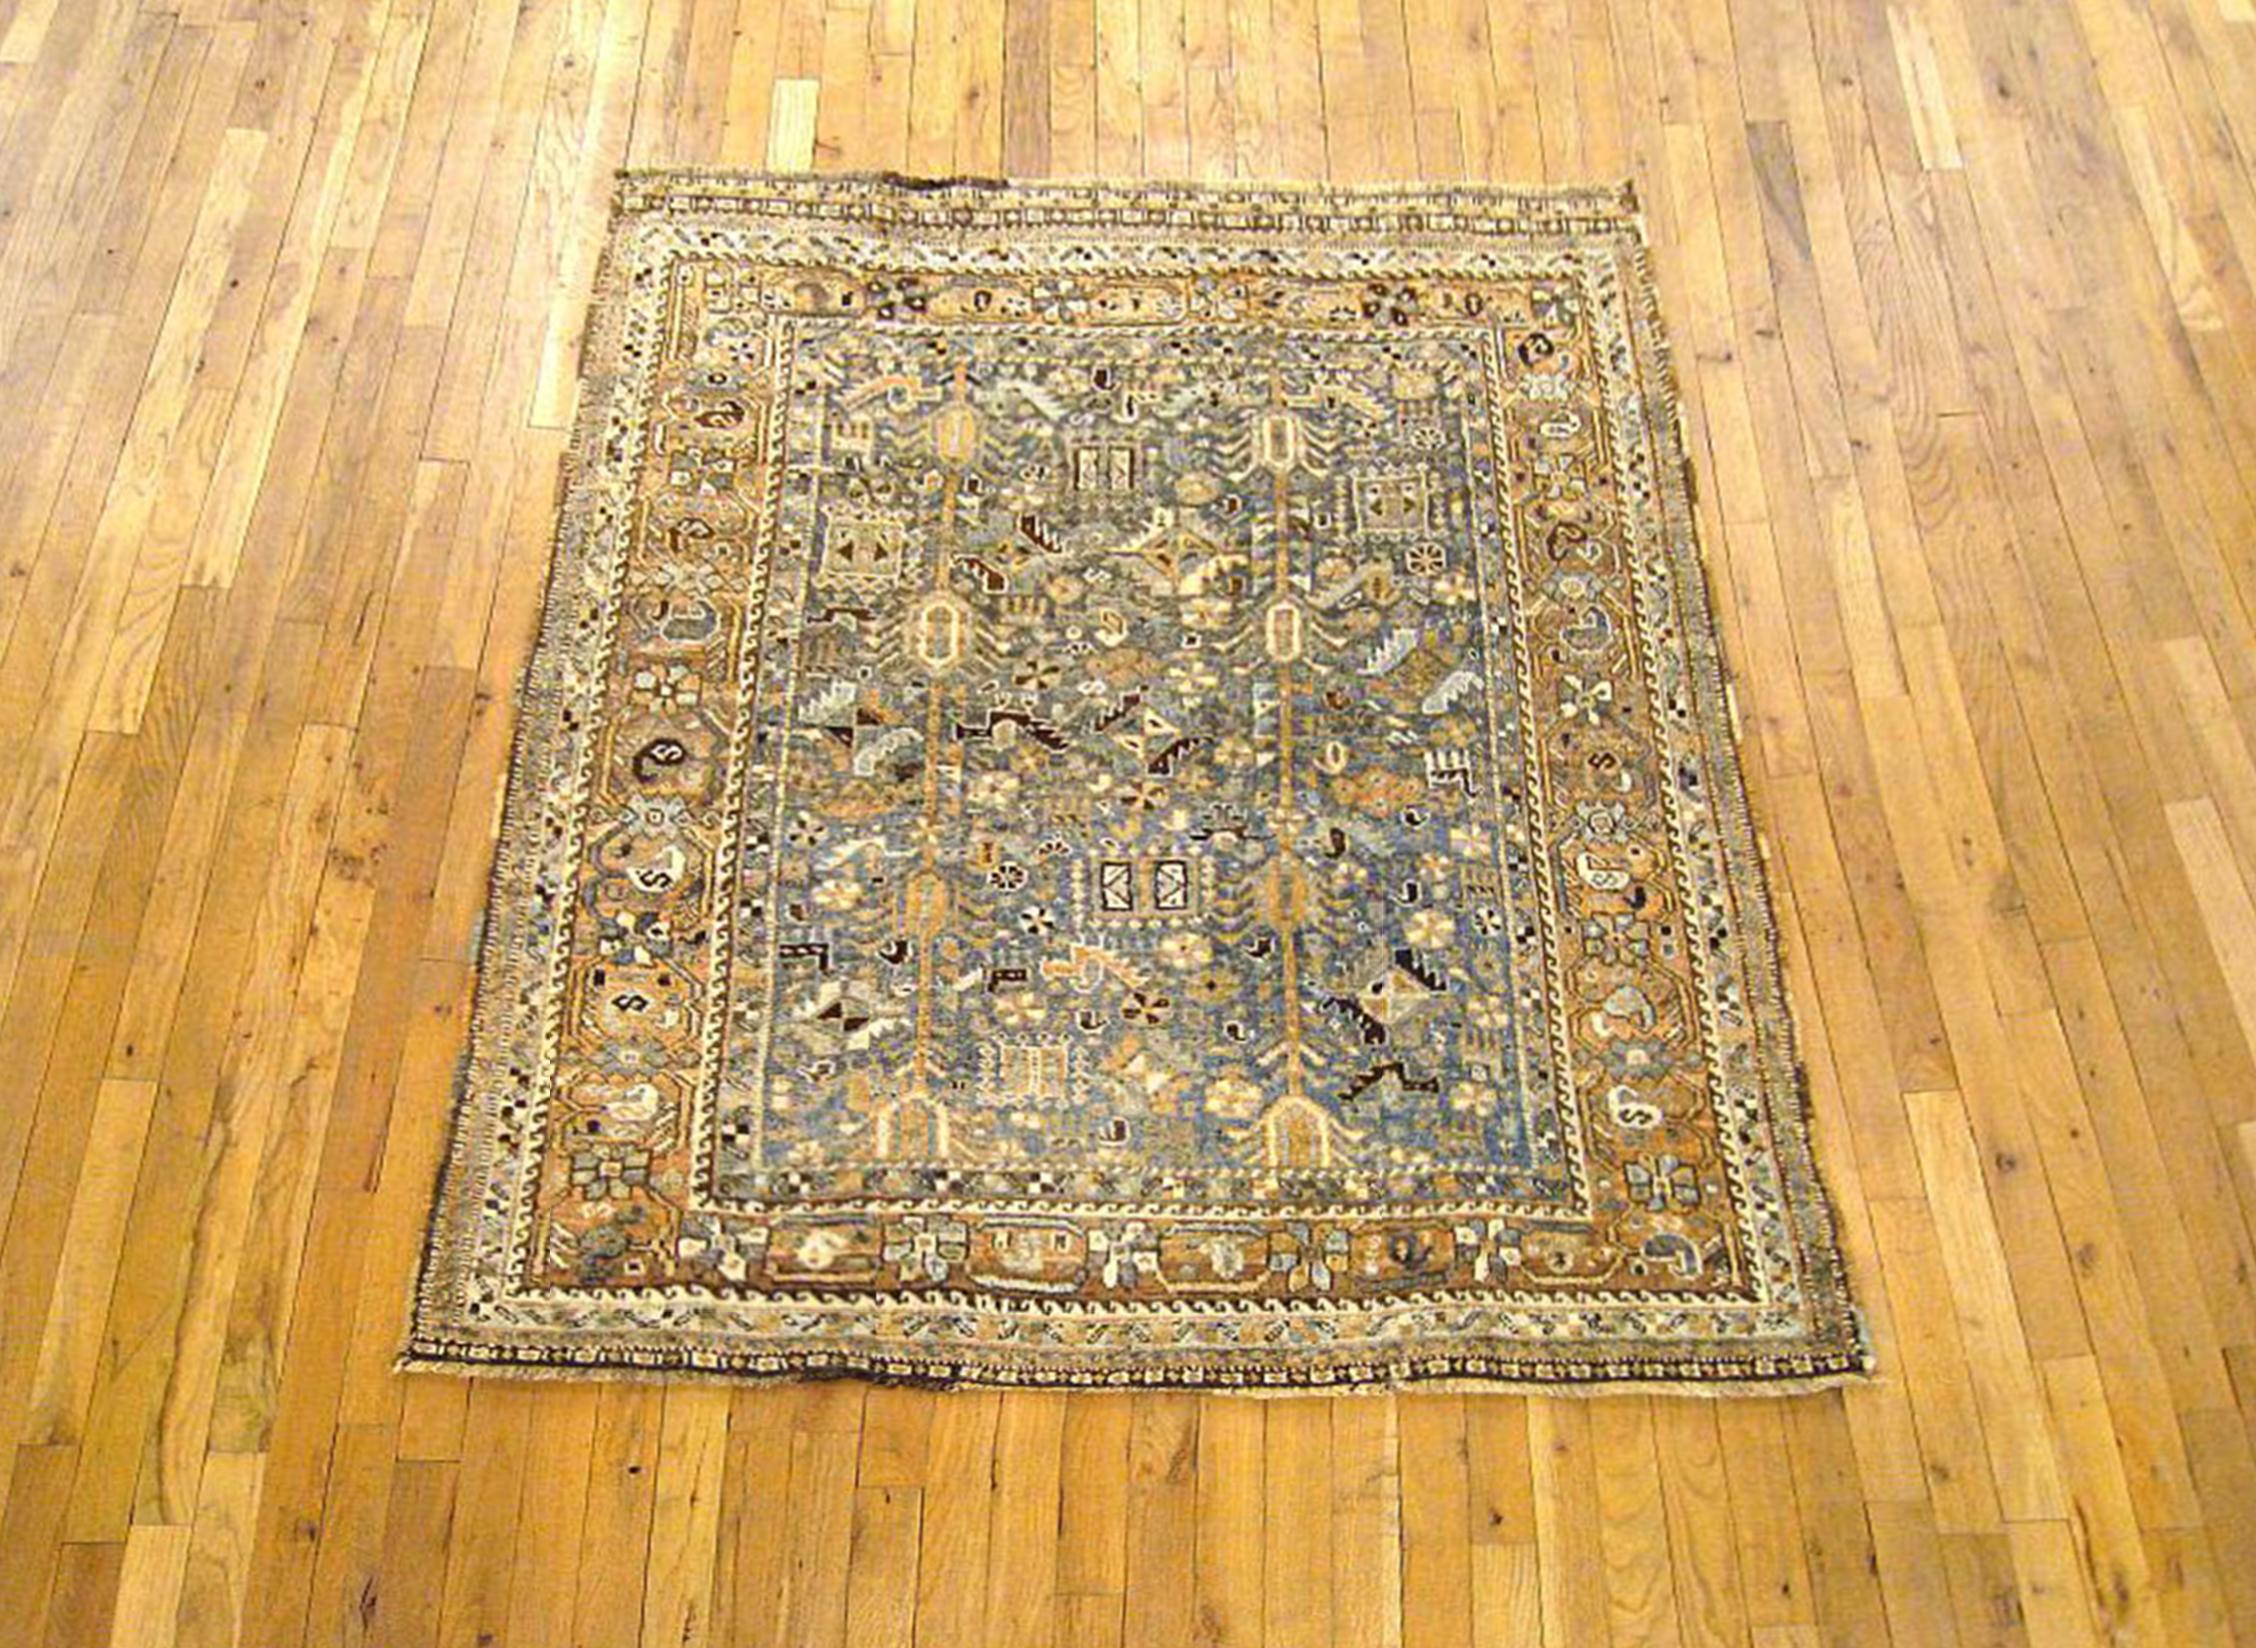 A vintage Persian Shiraz oriental rug, size 5'1 H; x 4'4 W, circa 1940. This lovely small hand-knotted wool carpet features a variety of stylized tribal design elements on the soft blue central field, with a complementary soft red border. The